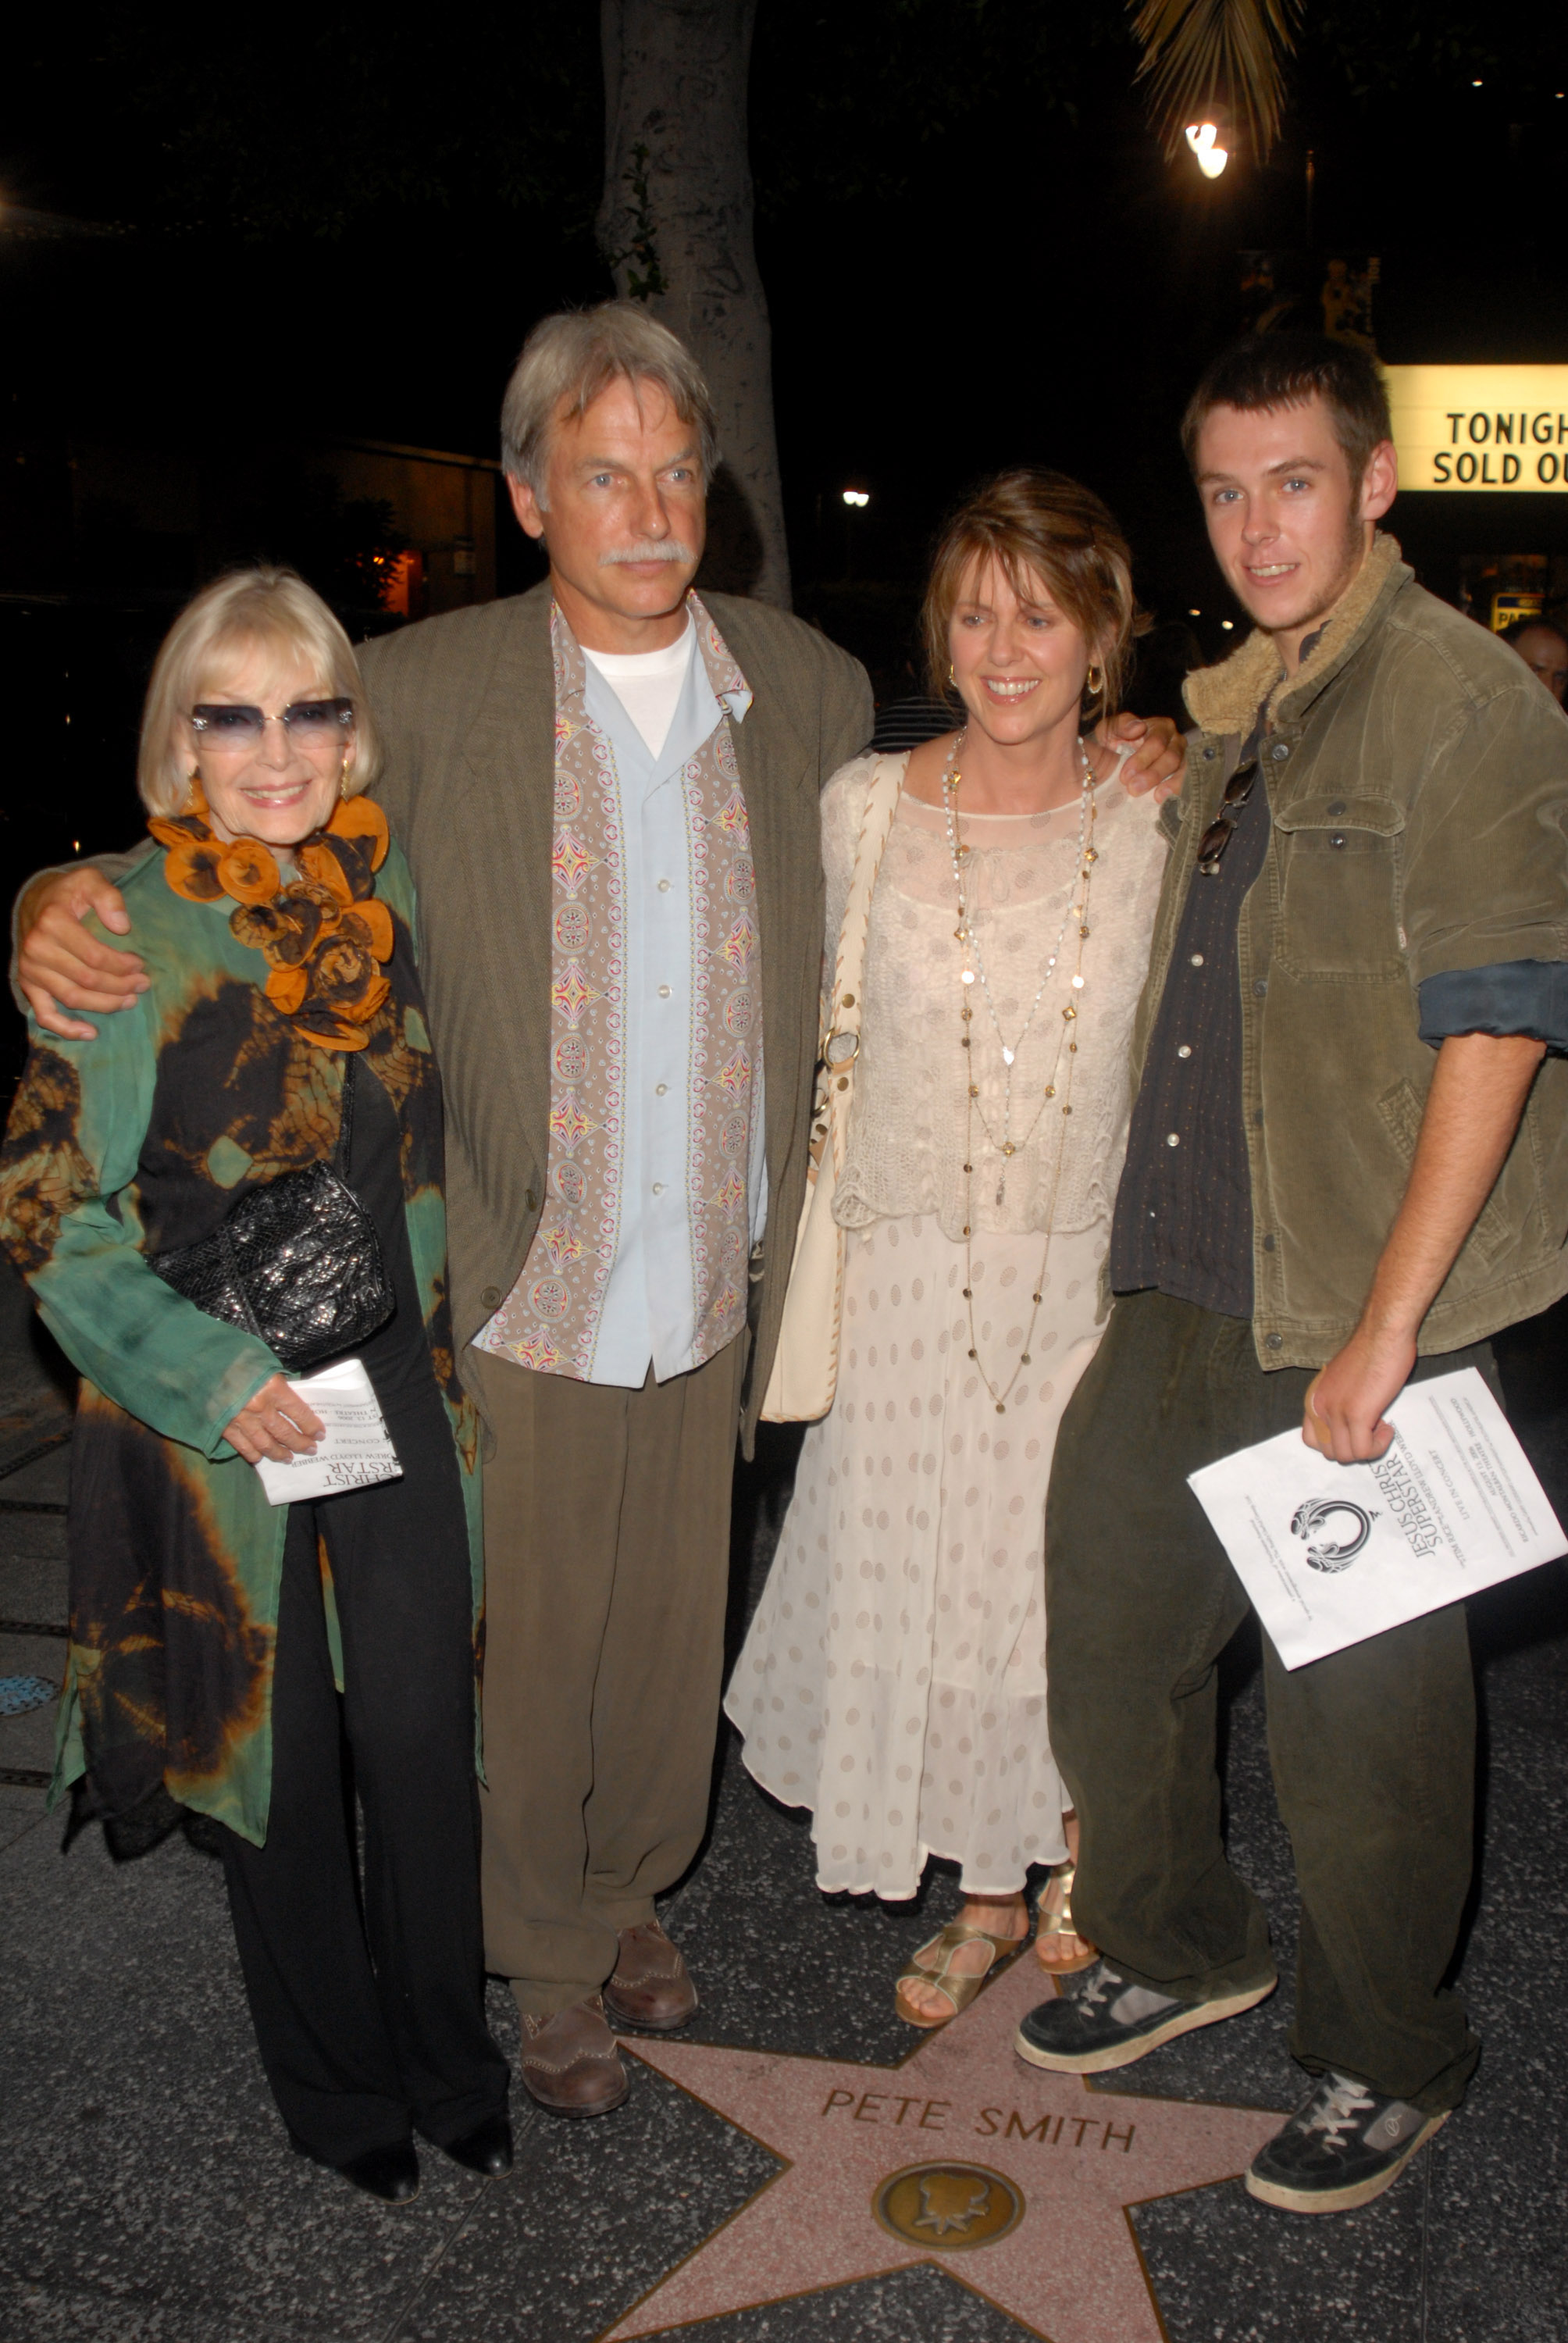 Elyse Knox, Mark Harmon, Pam Dawber, and Sean Harmon at the "Jesus Christ Superstar" Los Angeles performance on August 13, 2006. | Source: Getty Images